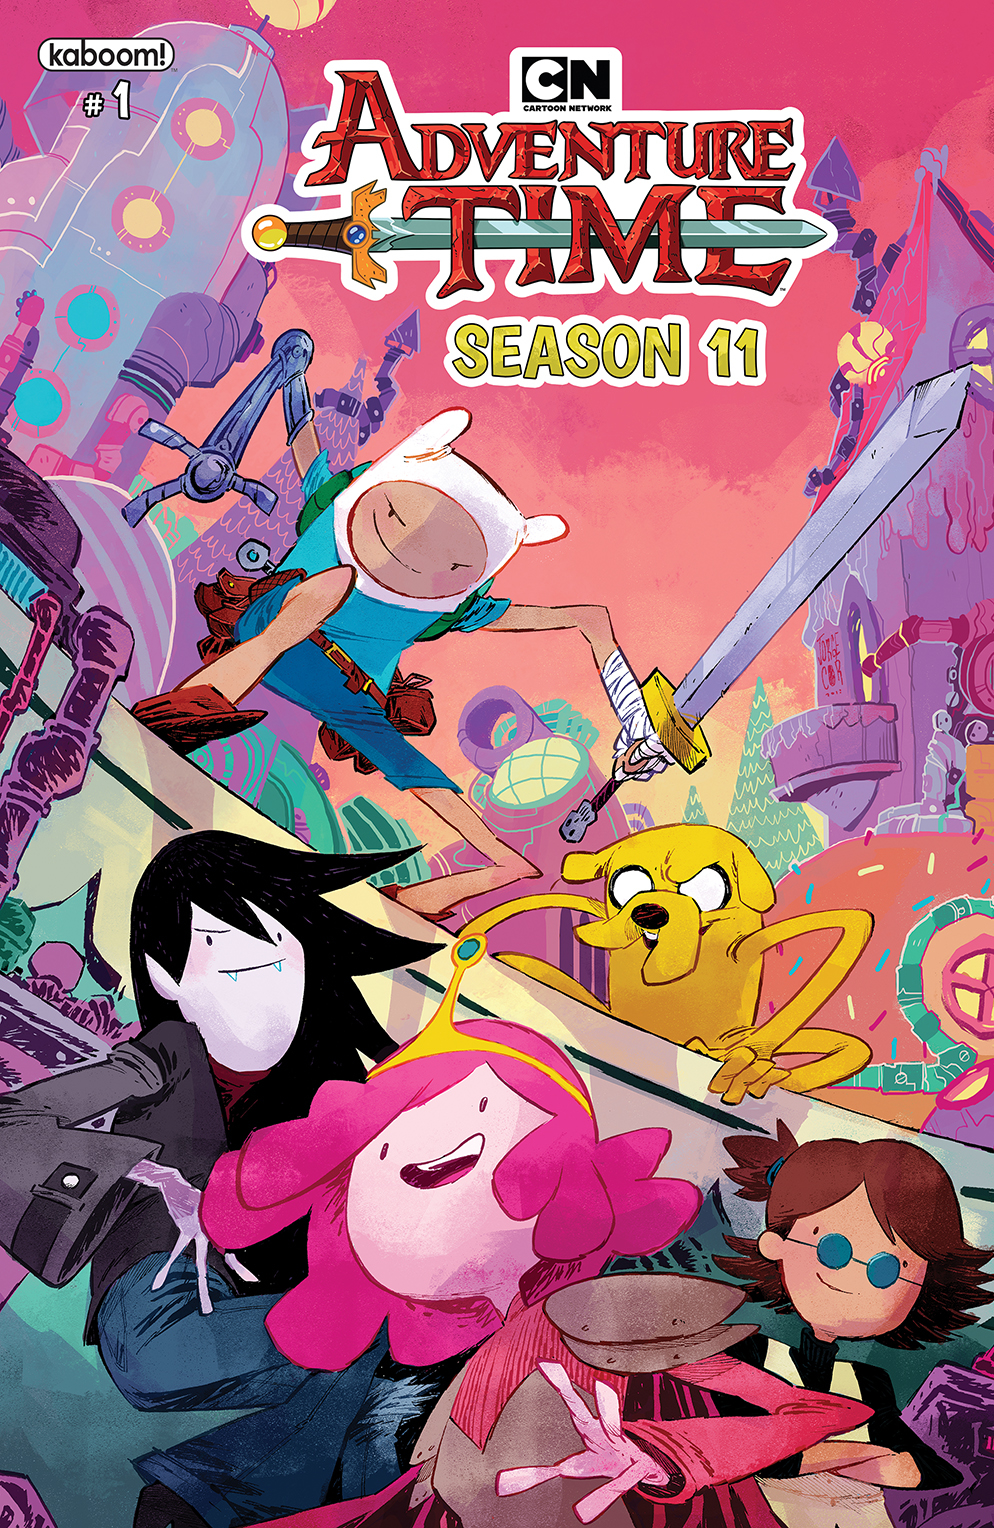 Adventure Time With Fionna And Cake' #6 Covers Released  Adventure time,  Adventure time anime, Adventure time art